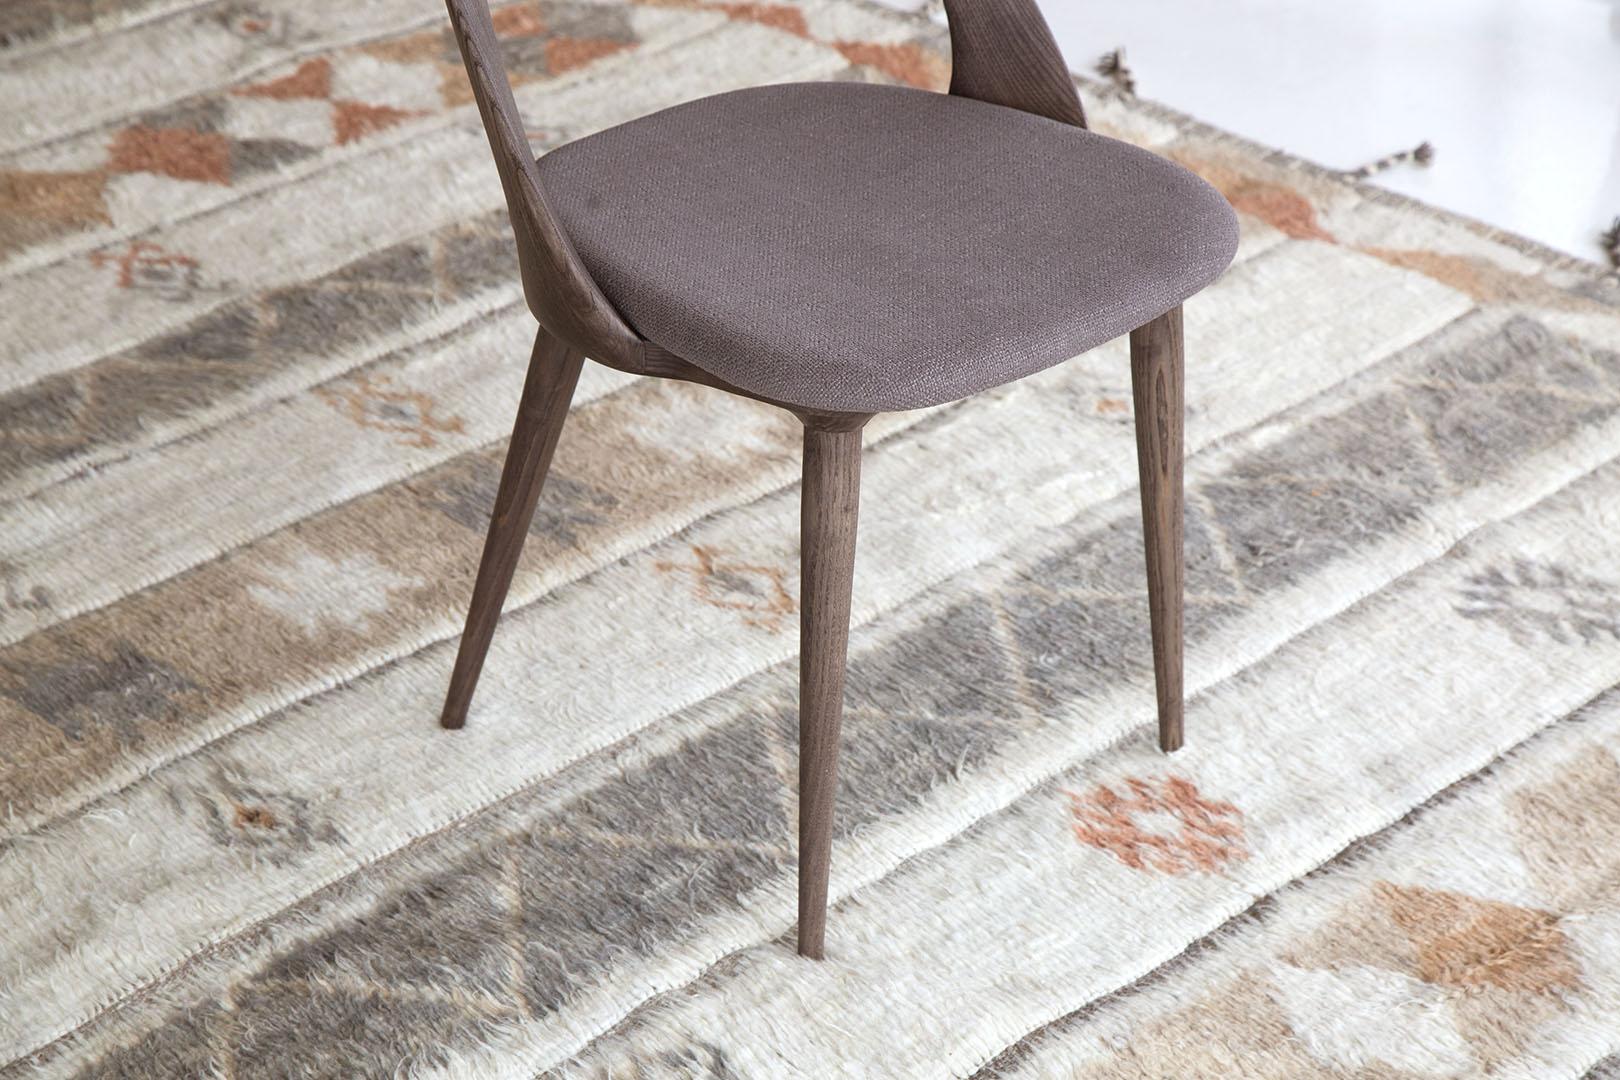 Designed is LA 'Sarma' is made up of luxurious handwoven wool, inspired by vintage Scandinavian design elements, and recreated for the modern design world. 'Kust' also meaning 'coast' was consciously designed for a proper coastal lifestyle.

Rug